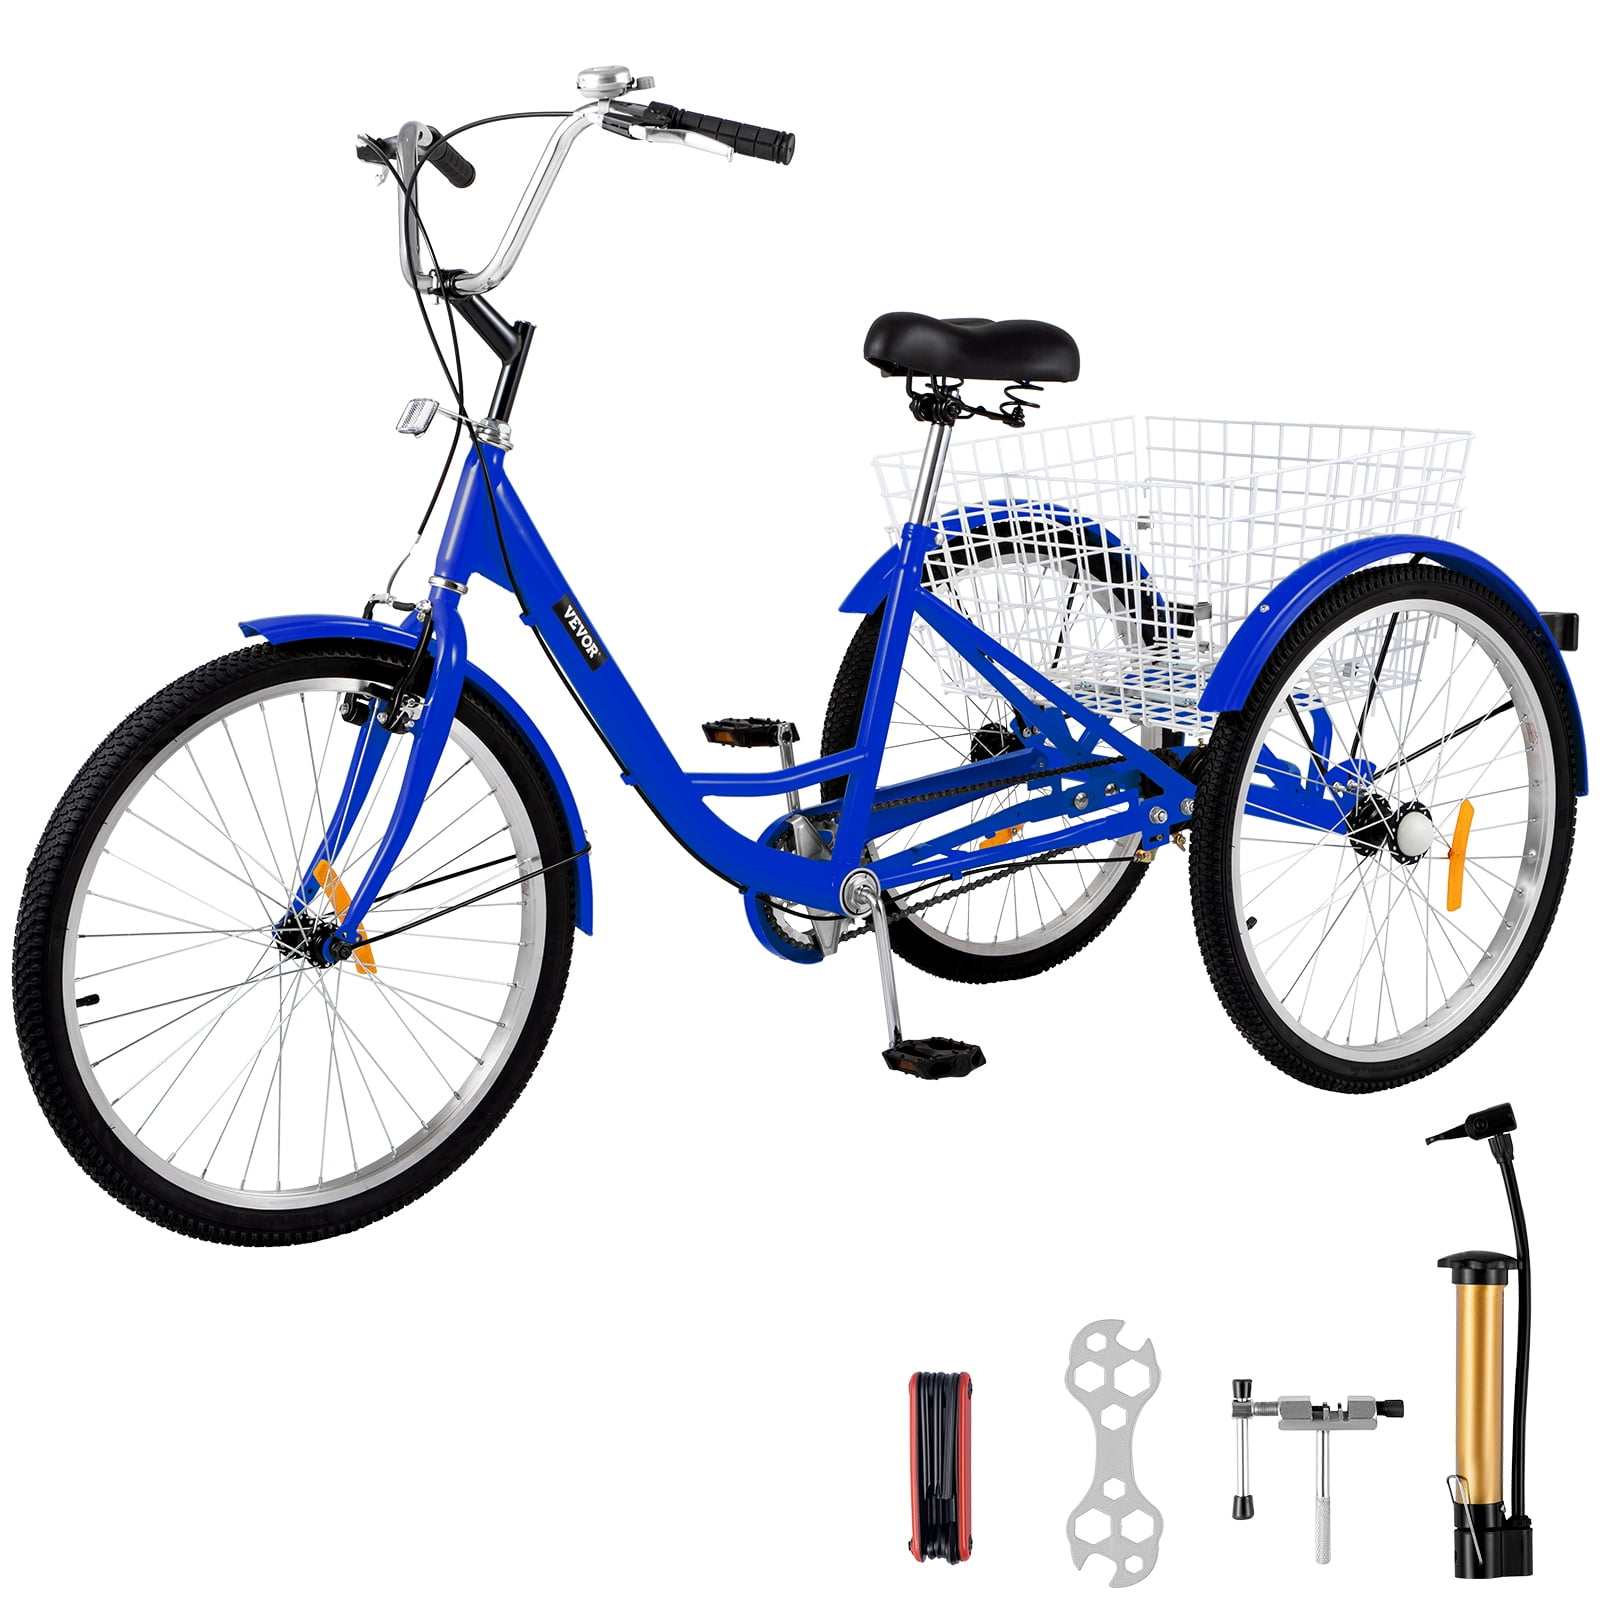 Details about   24" Adult Tricycle 1/7 Speed 3-Wheel Trike Cruiser Bicycle w Basket for Shopping 